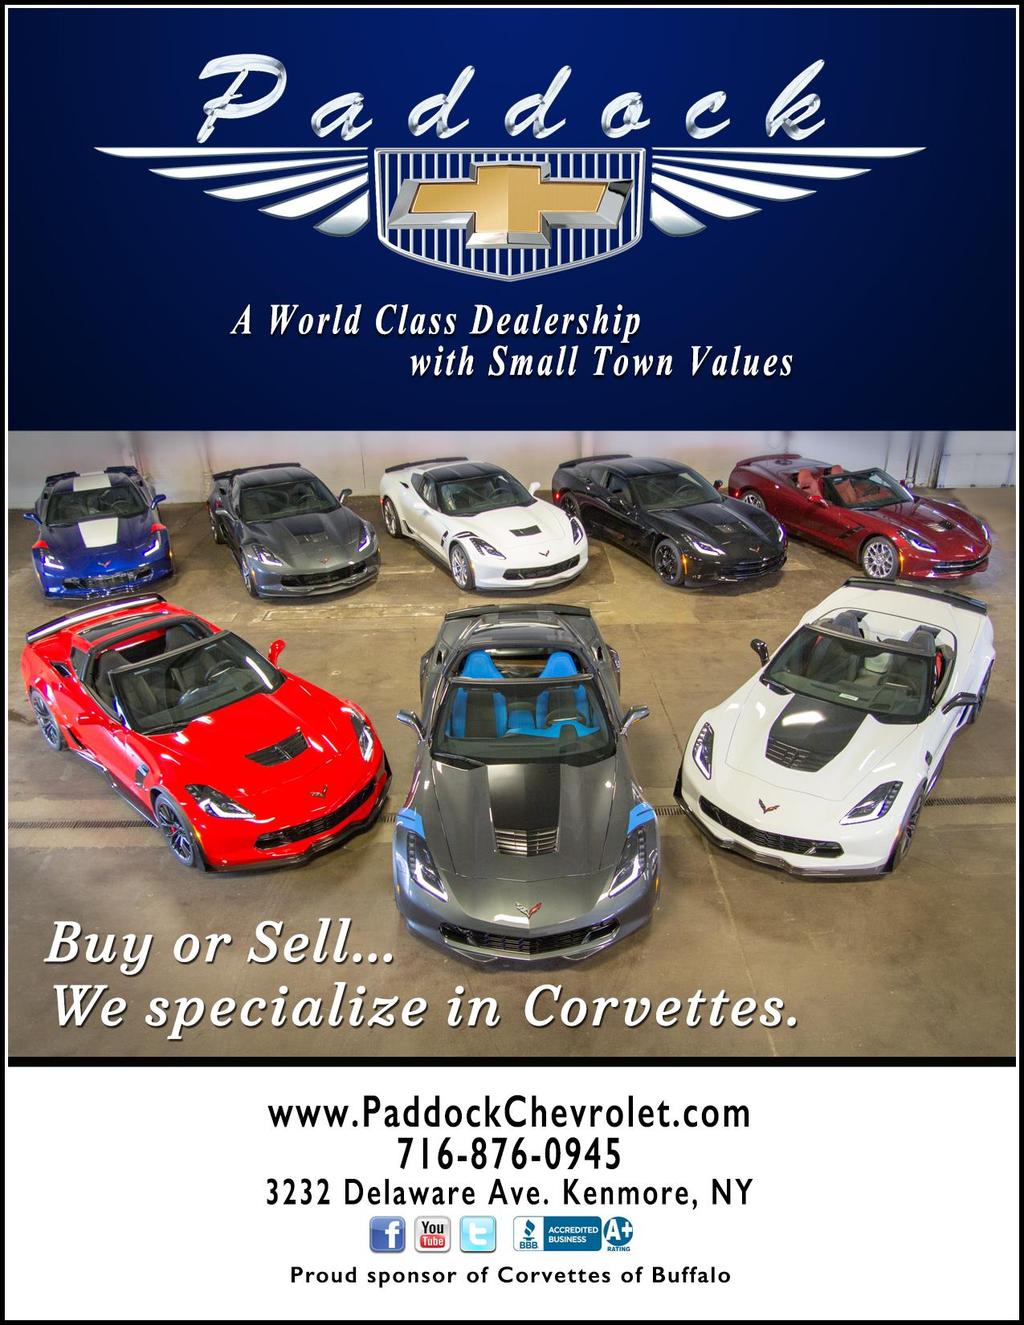 MAJOR SPONSORS for Ctrl + Click on these links to review our current NEW CAR and PREOWNED inventories. NEW ------------- http://www.paddockchevrolet.